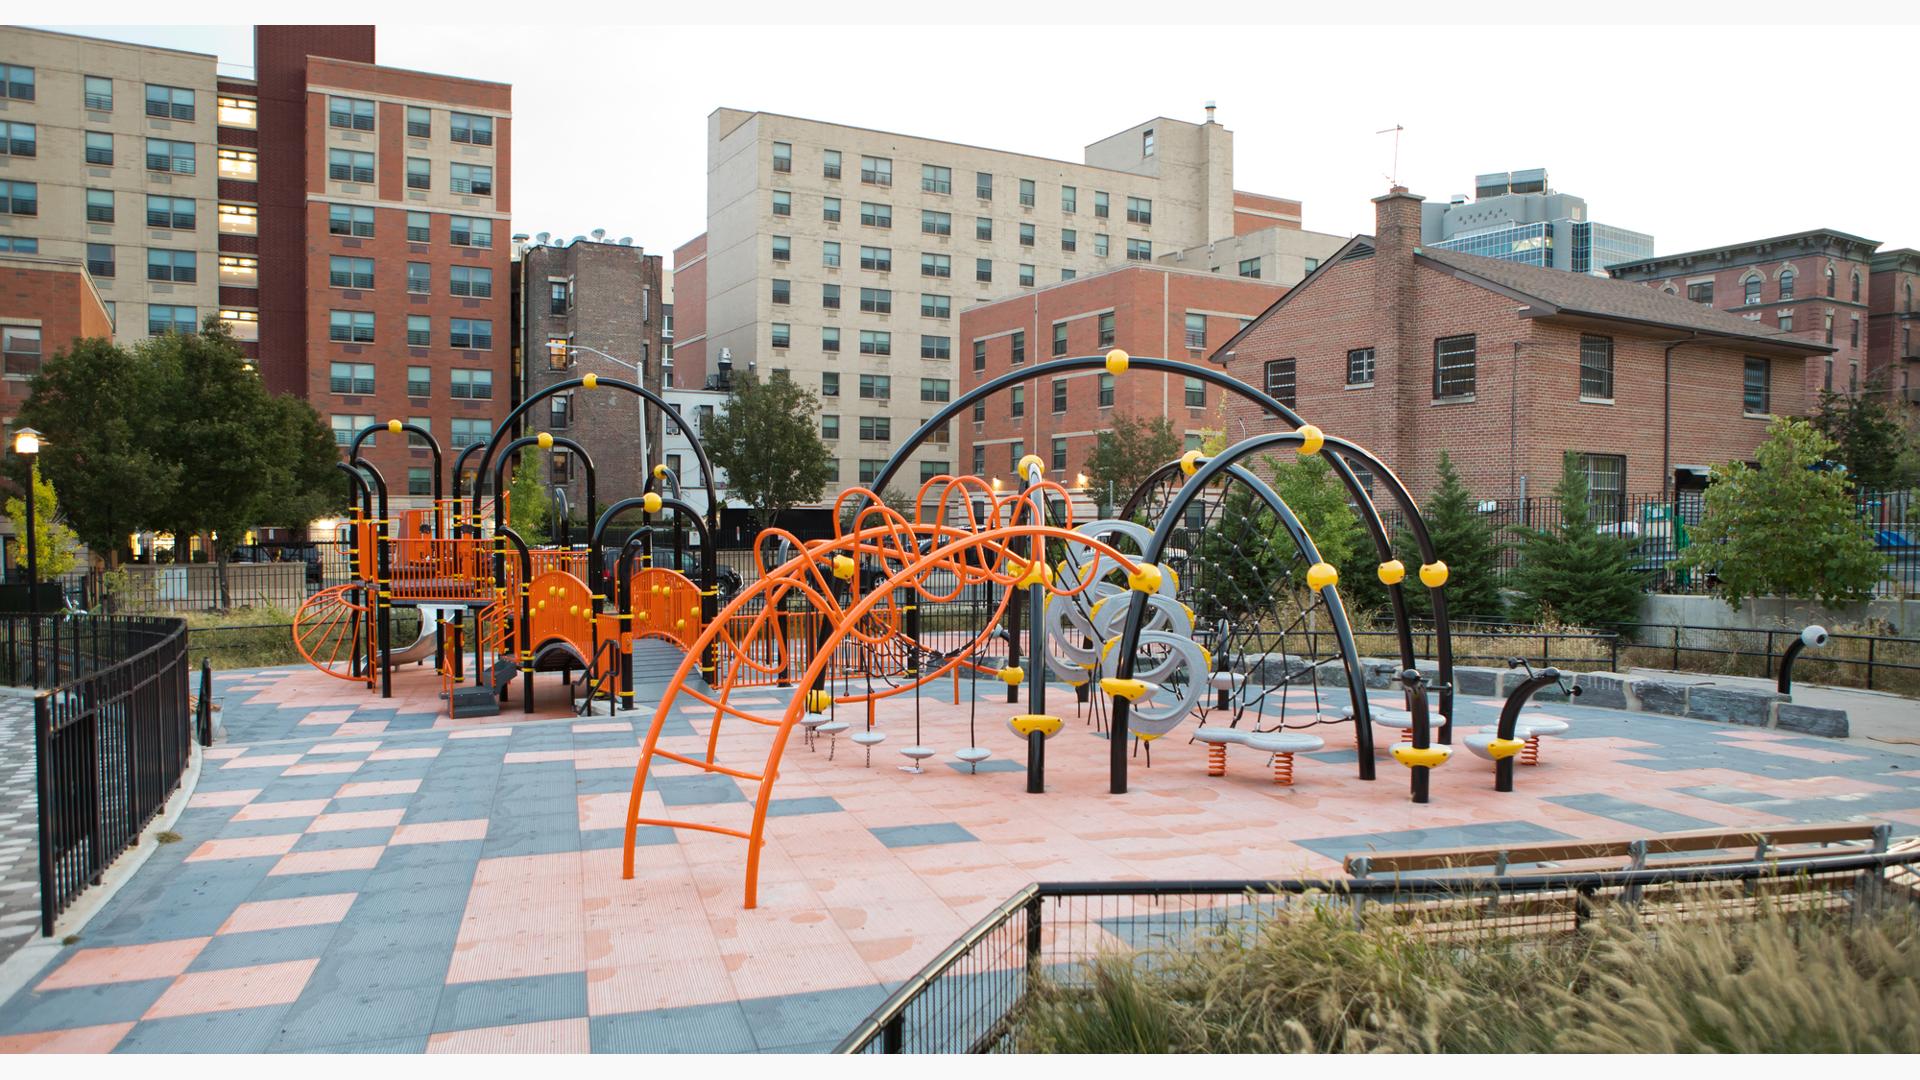 Black arched playground posts make up the framework of play structures at a city playground with black and orange square safety surfacing.